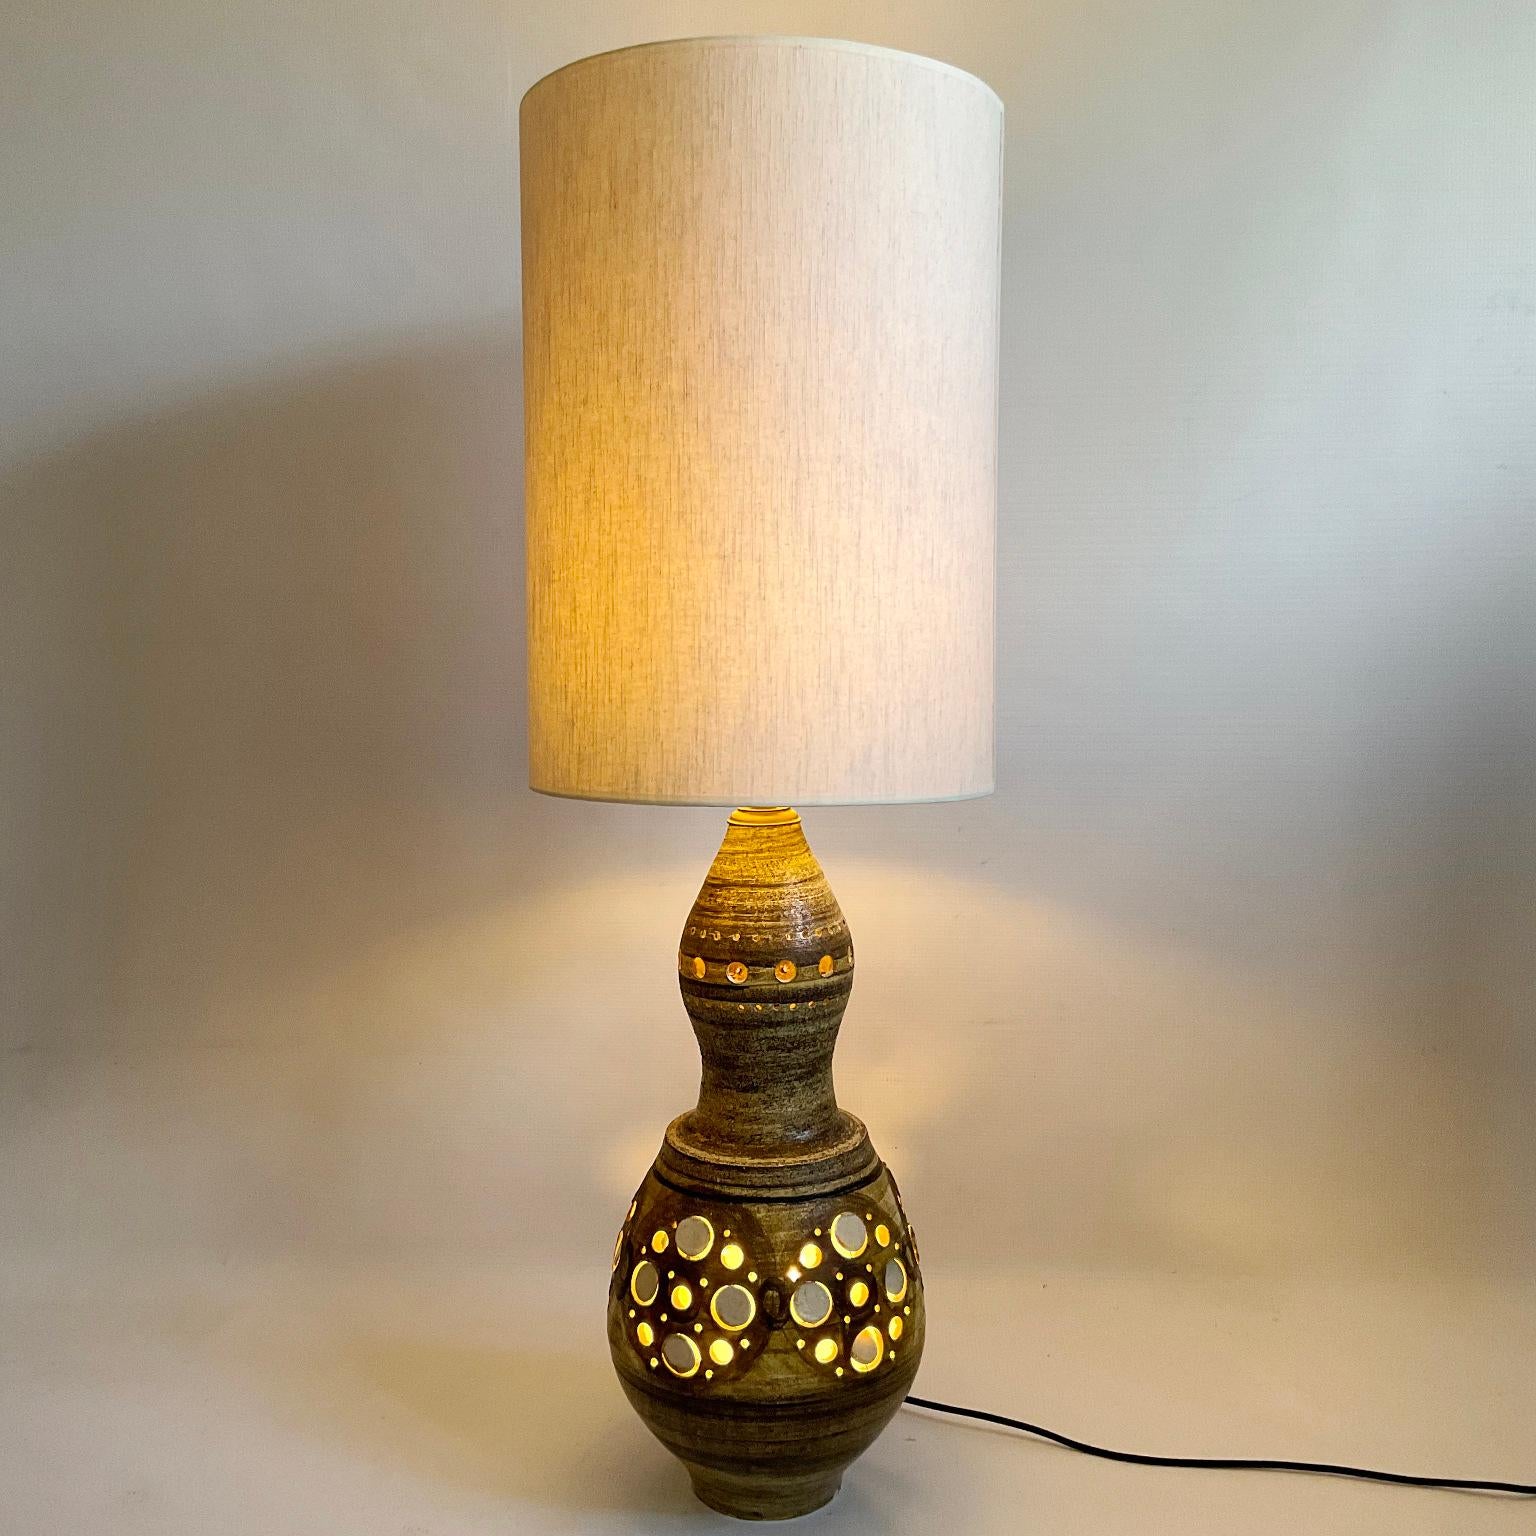 This large table lamp or floor lamp from the 1960s is a fine example of craftsmanship, made of clay and painted by hand by the artist Georges Pelletier, a French ceramist well known to collectors.
This lamp has two lights, one inside, highlighting